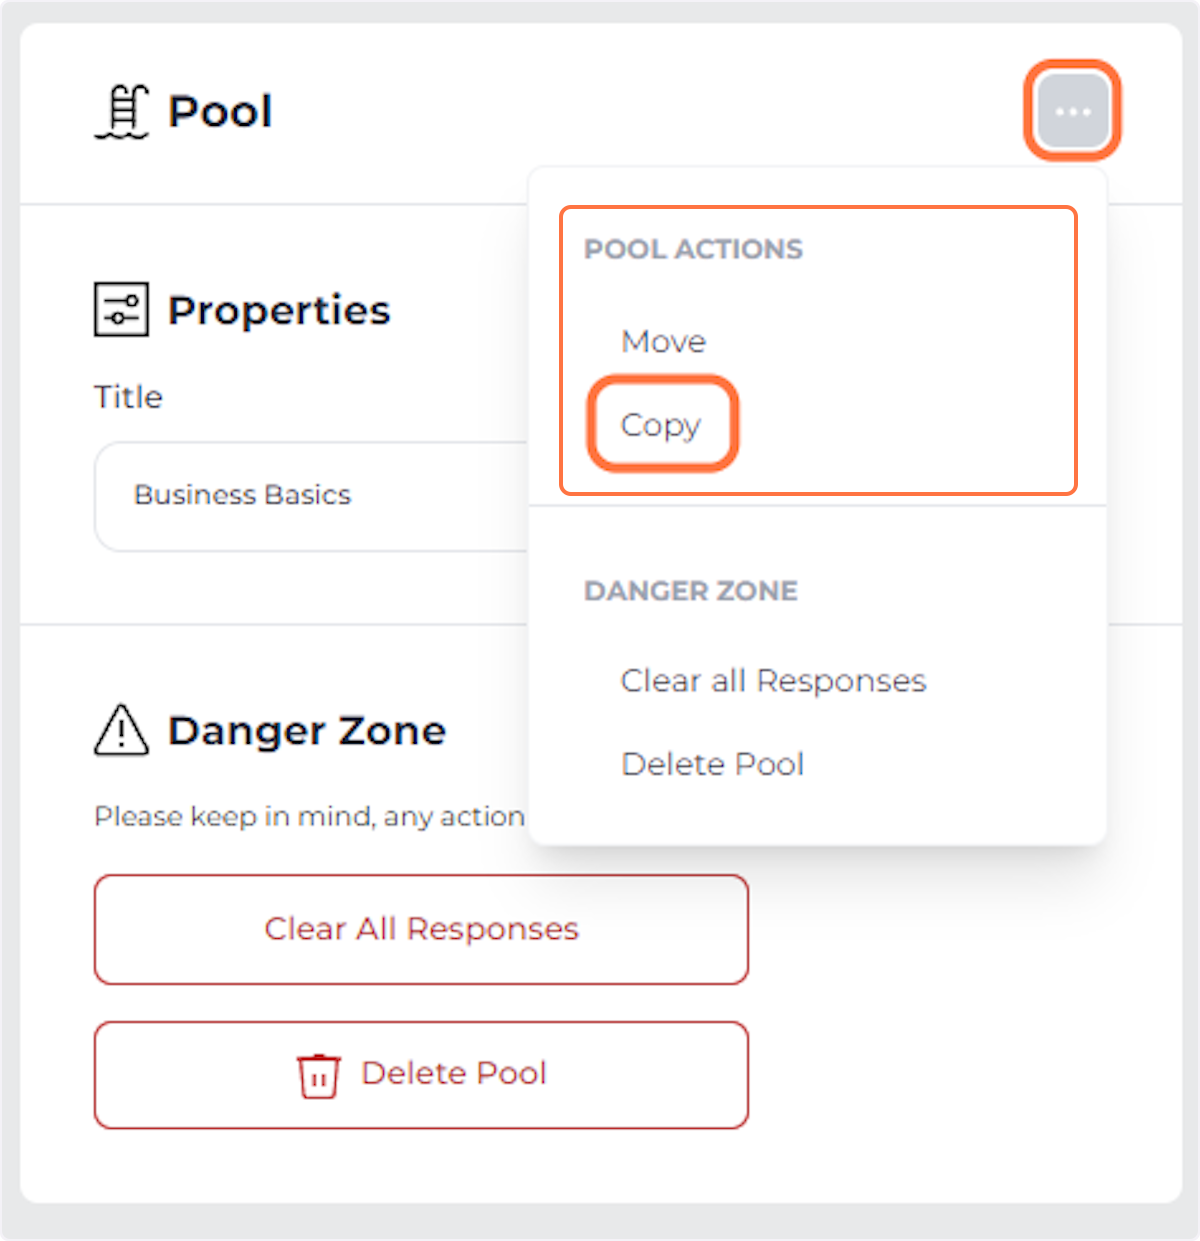 Click 'Copy' from the Pool Actions menu.